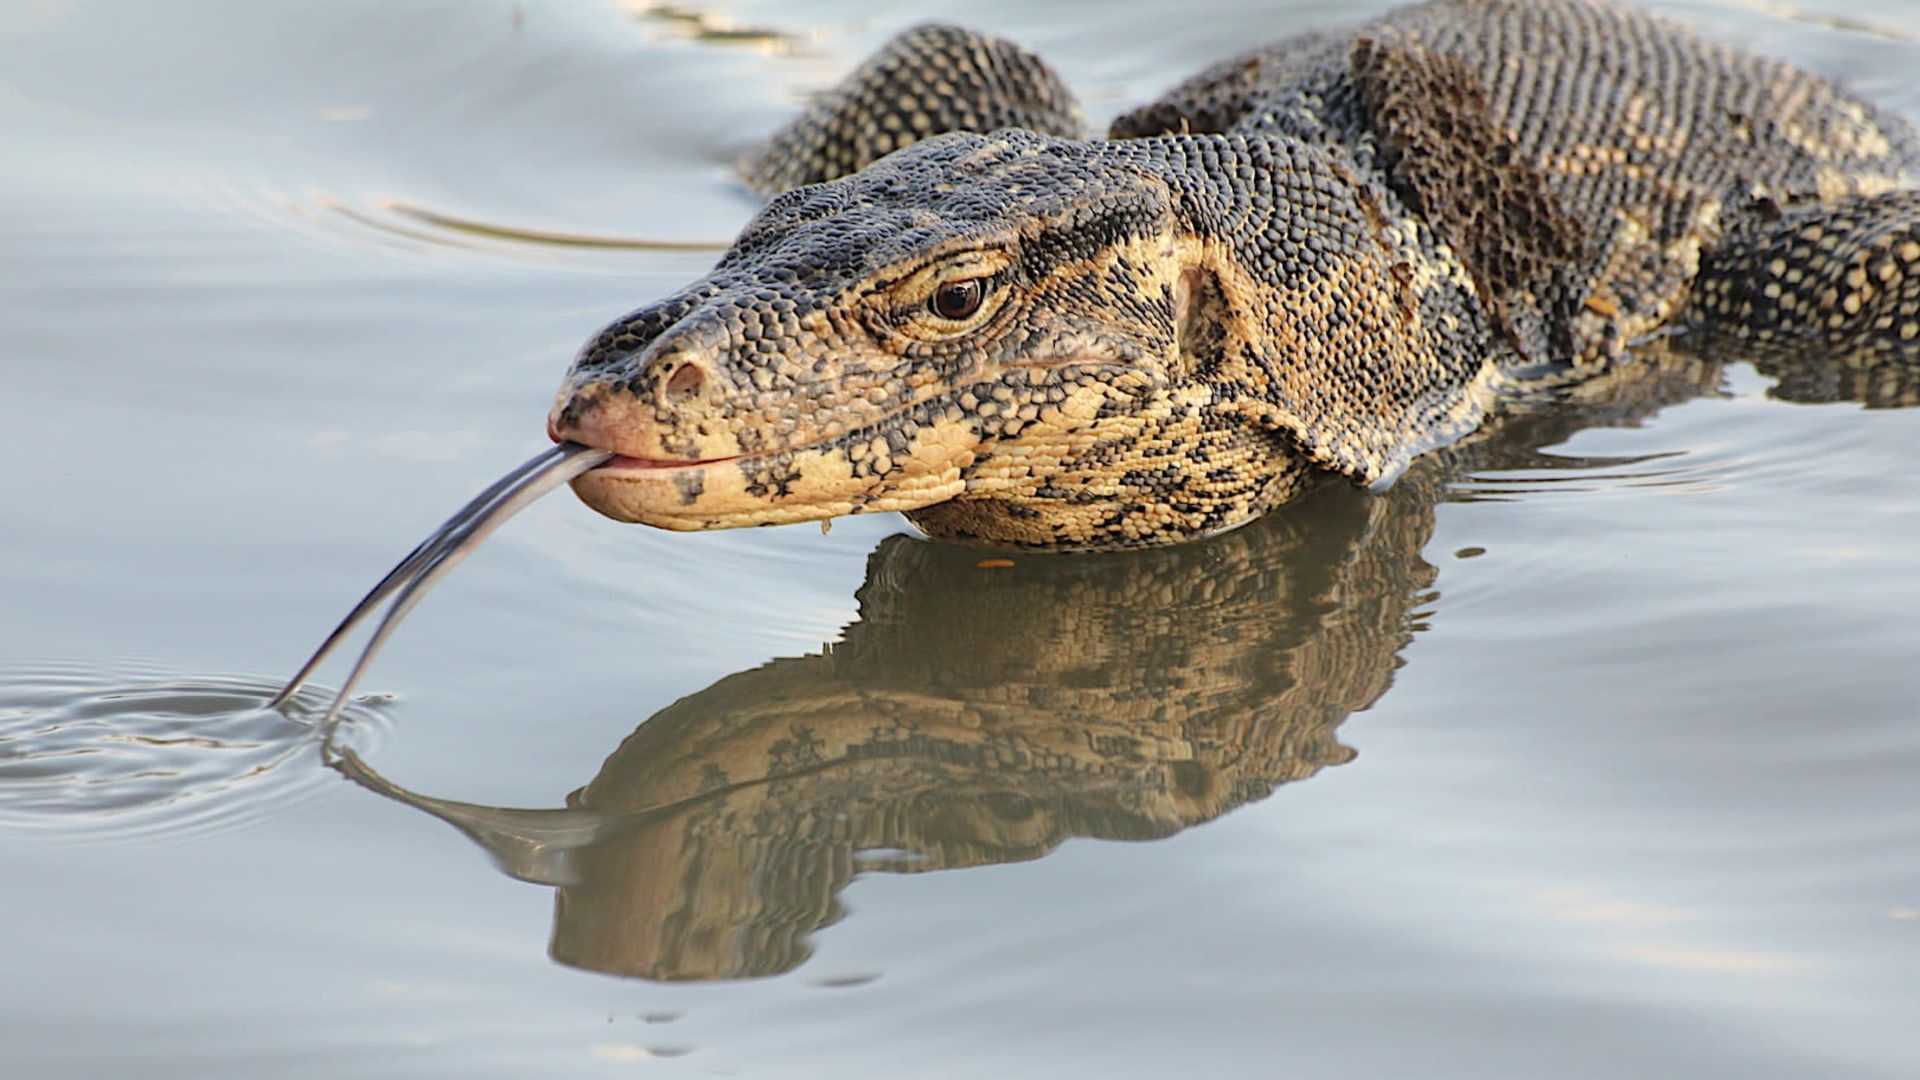 Living Dragon: Defence of the Water Monitor Lizard